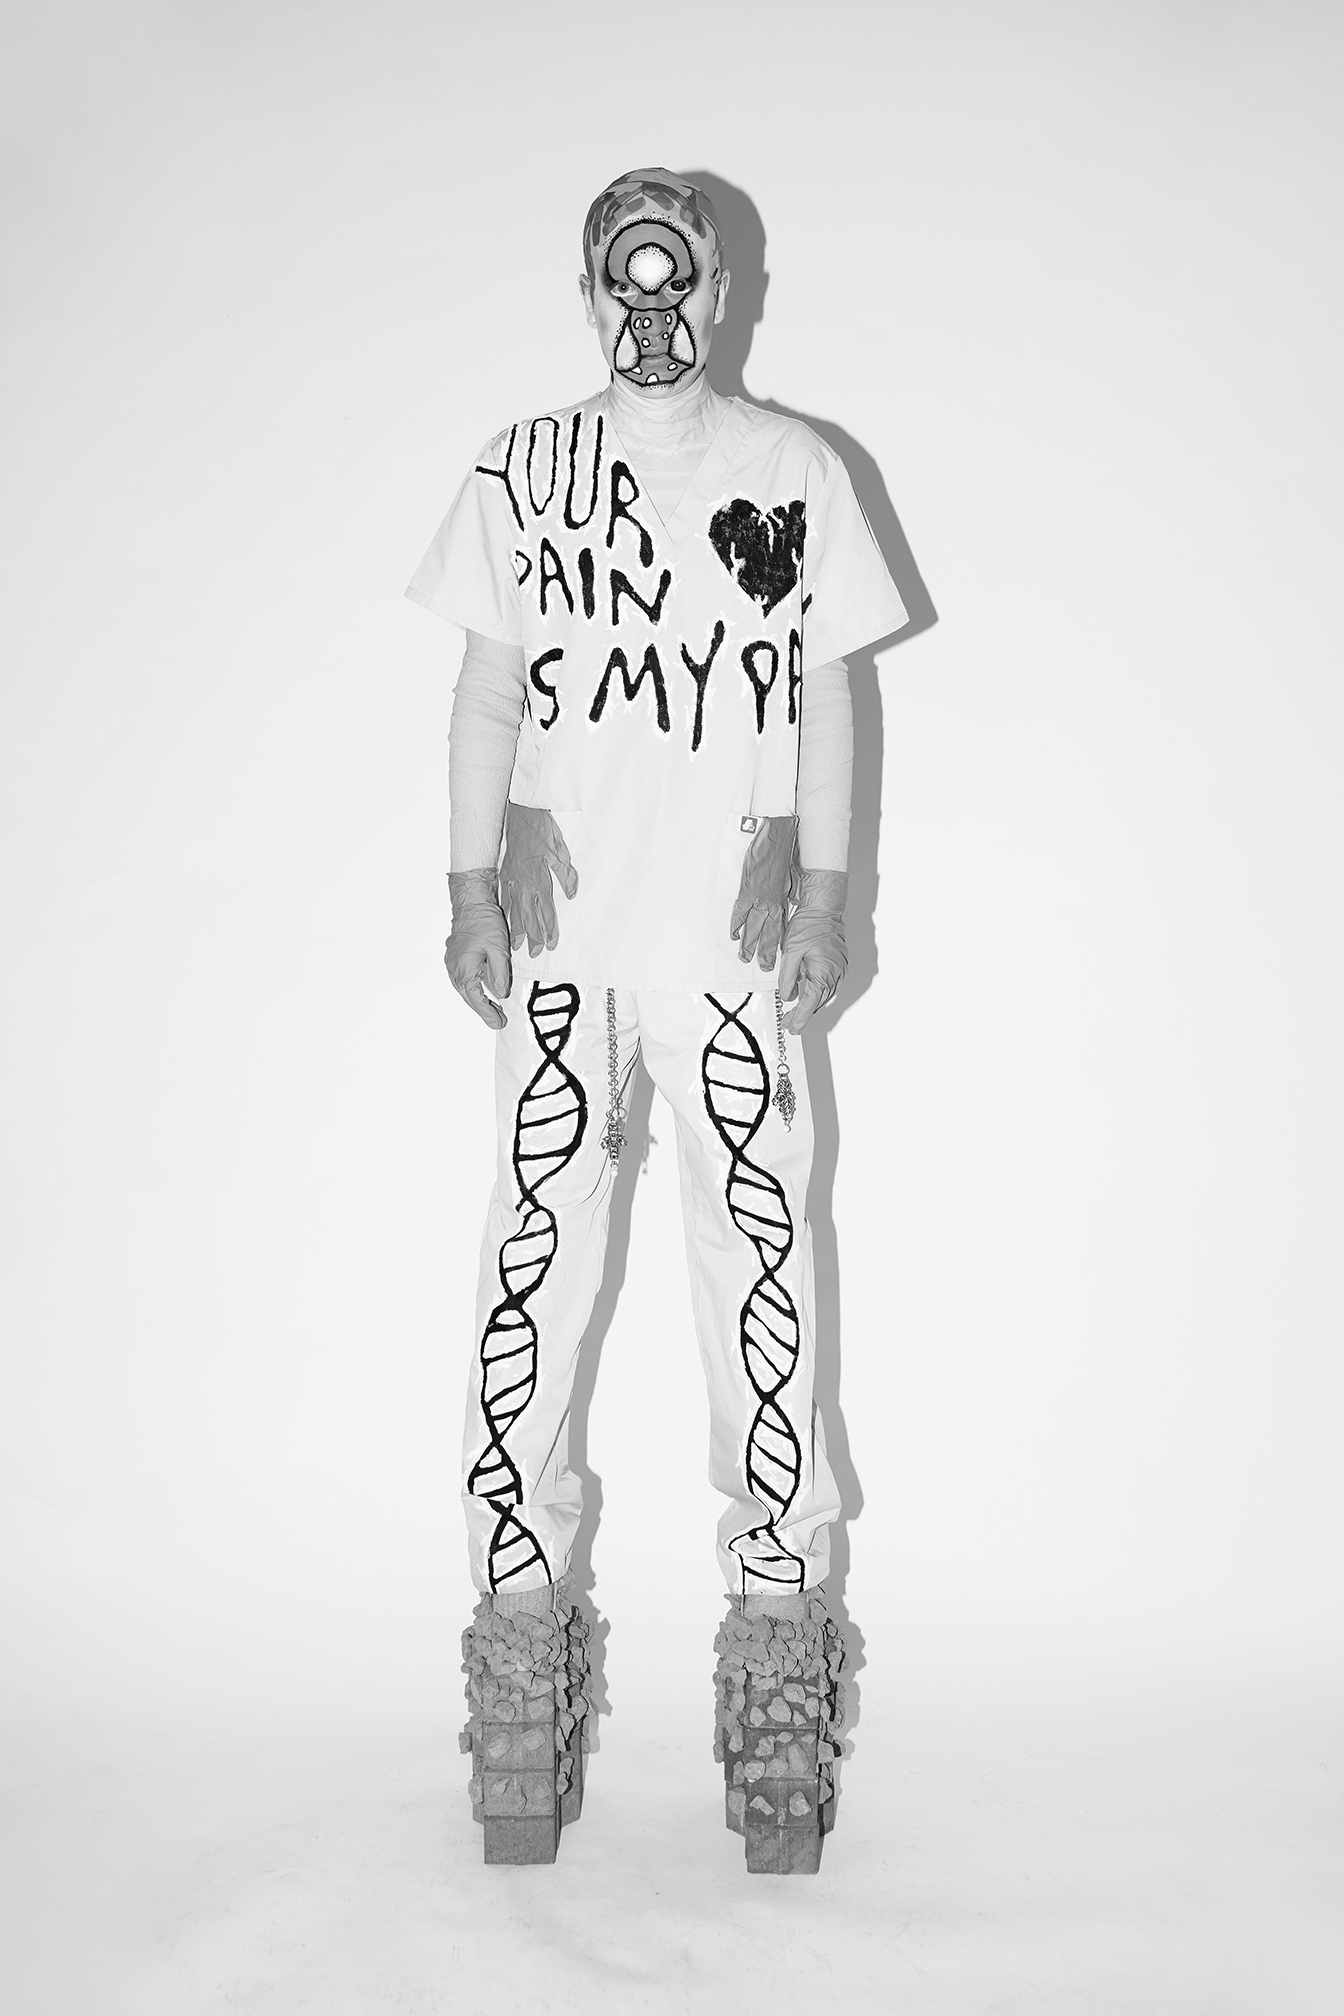 Jesse standing while looking at the camera with graphic facepaint on wearing scrubs against a white background